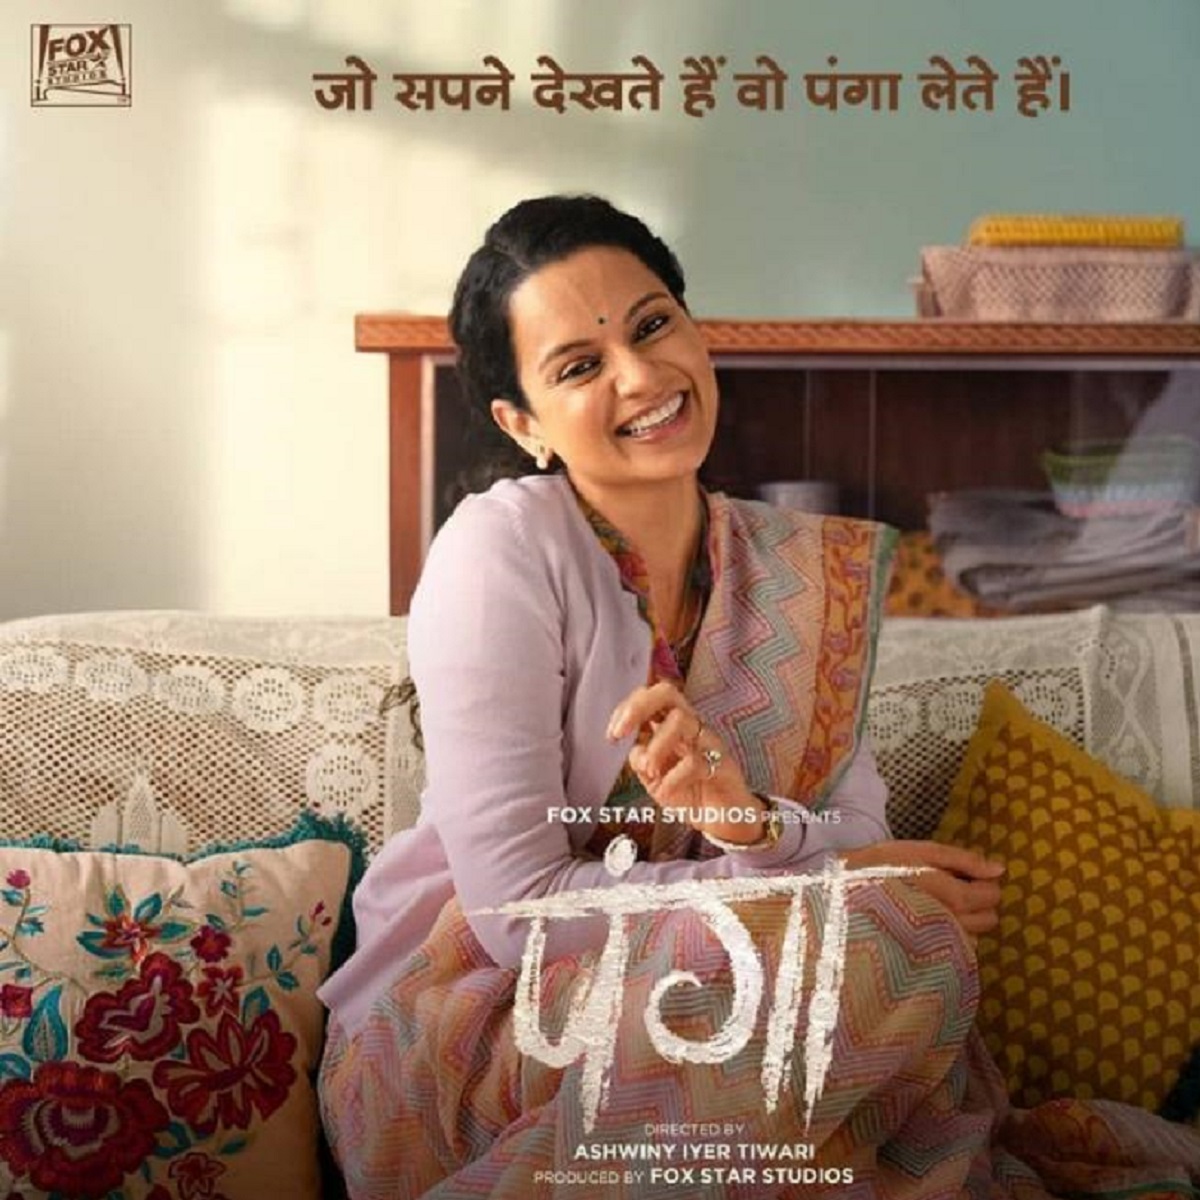 Panga turns 1: 5 reasons why Kangana Ranaut's film is an ode to dreams & motherhood that'll remain special